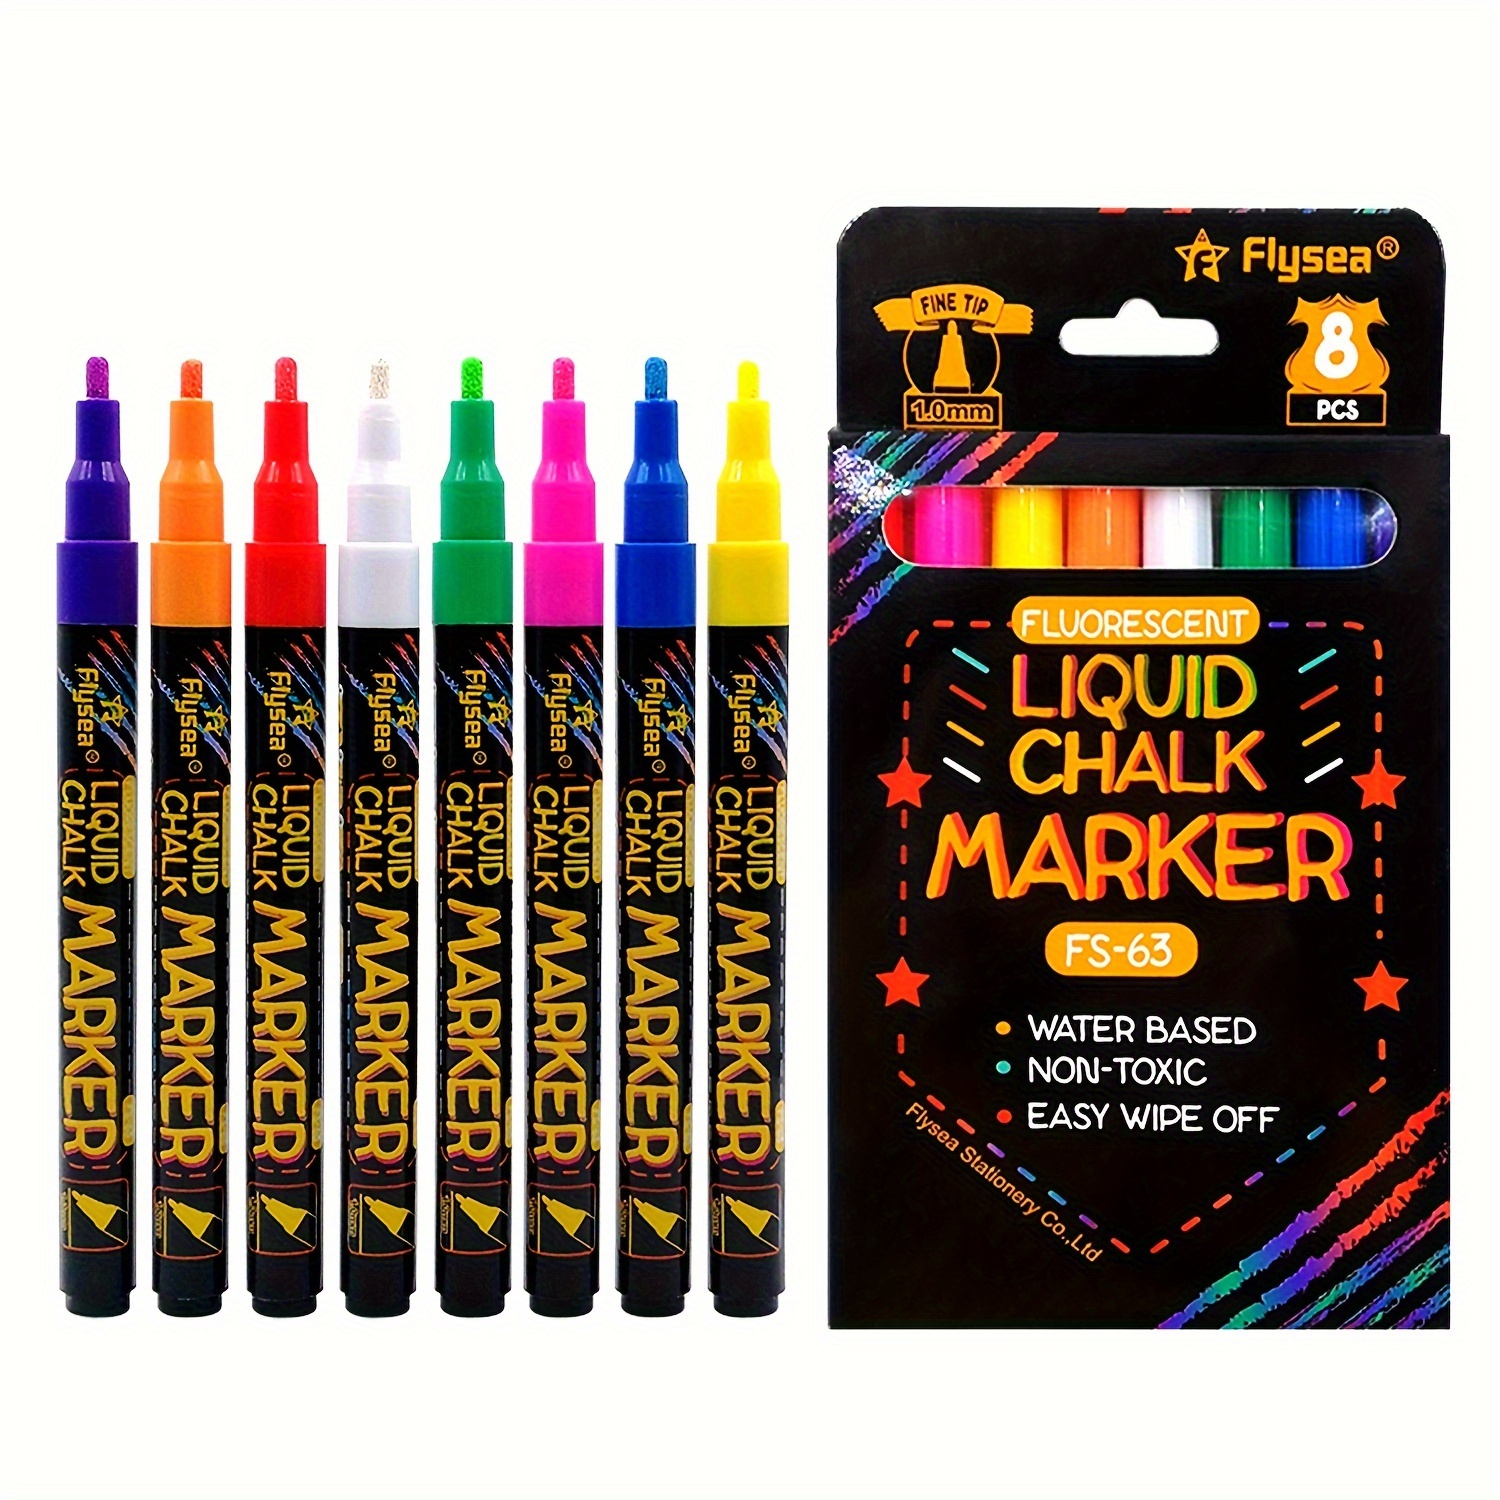 Liquid Chalk Markers for Blackboards - Use as Glass Window Markers